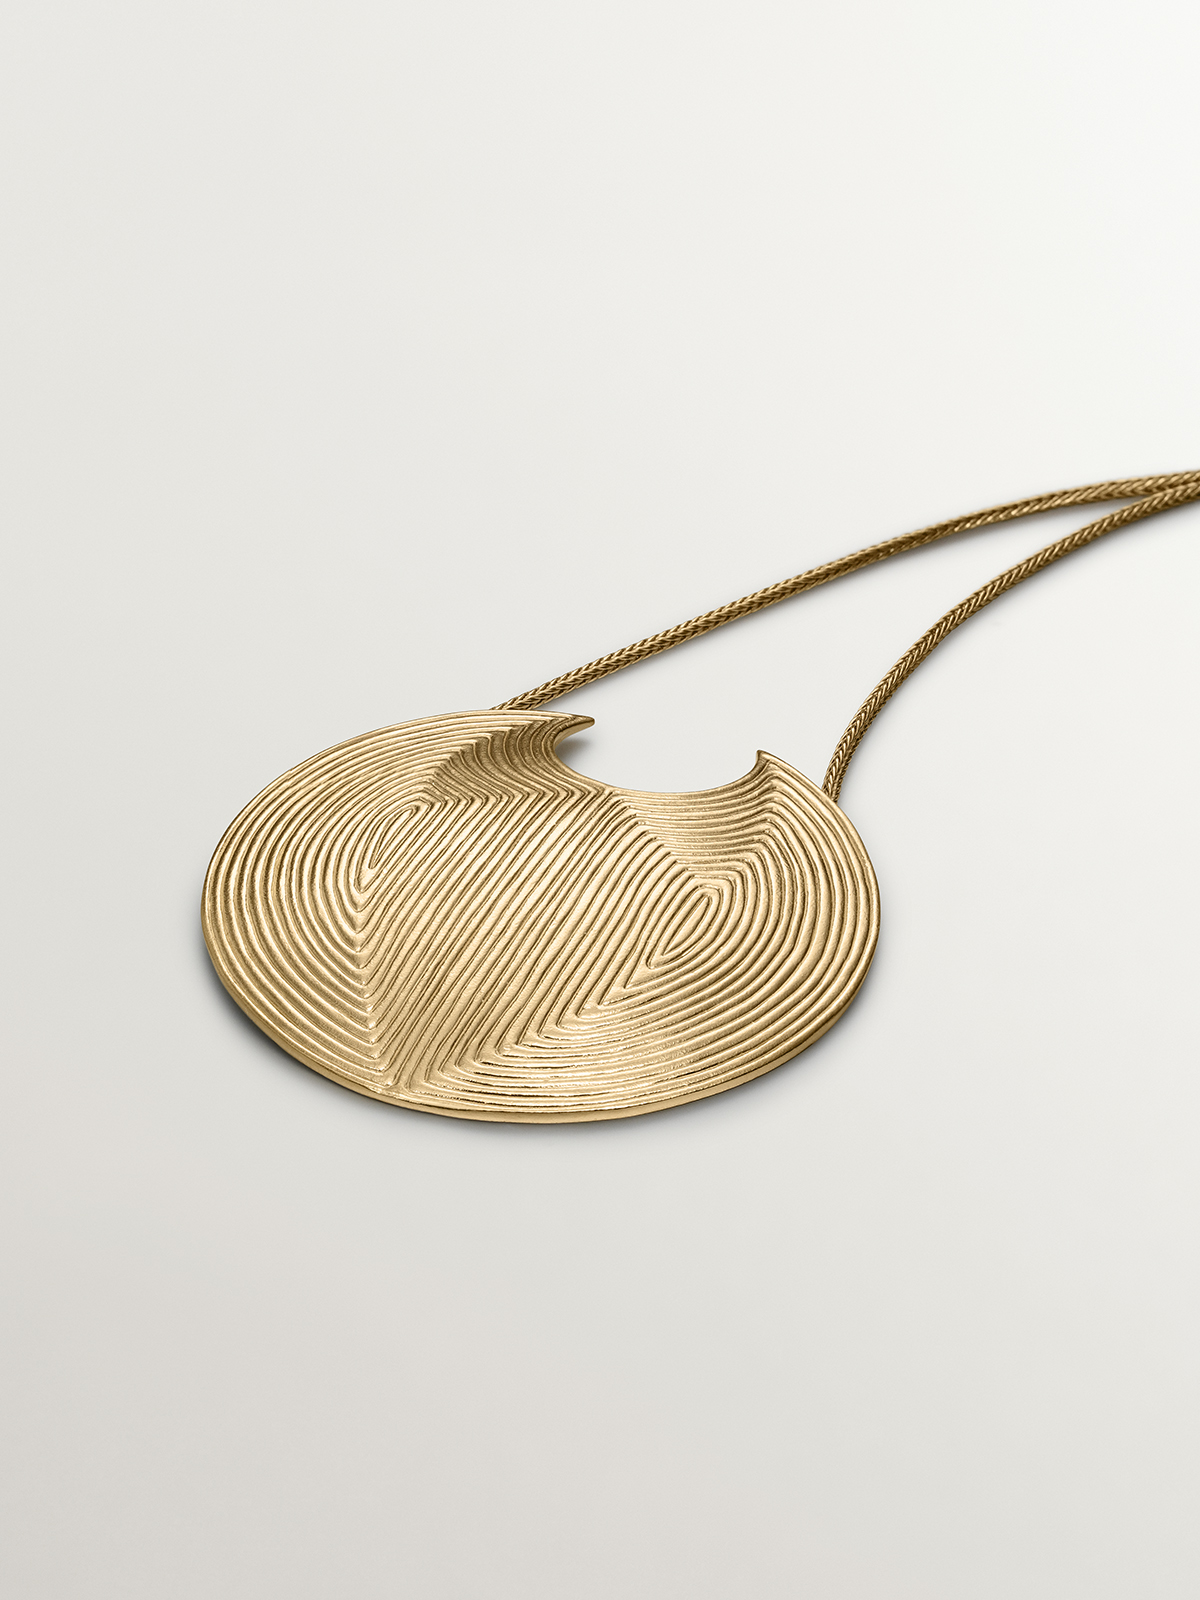 Large circular pendant made of 925 silver, bathed in 18K yellow gold with relief.